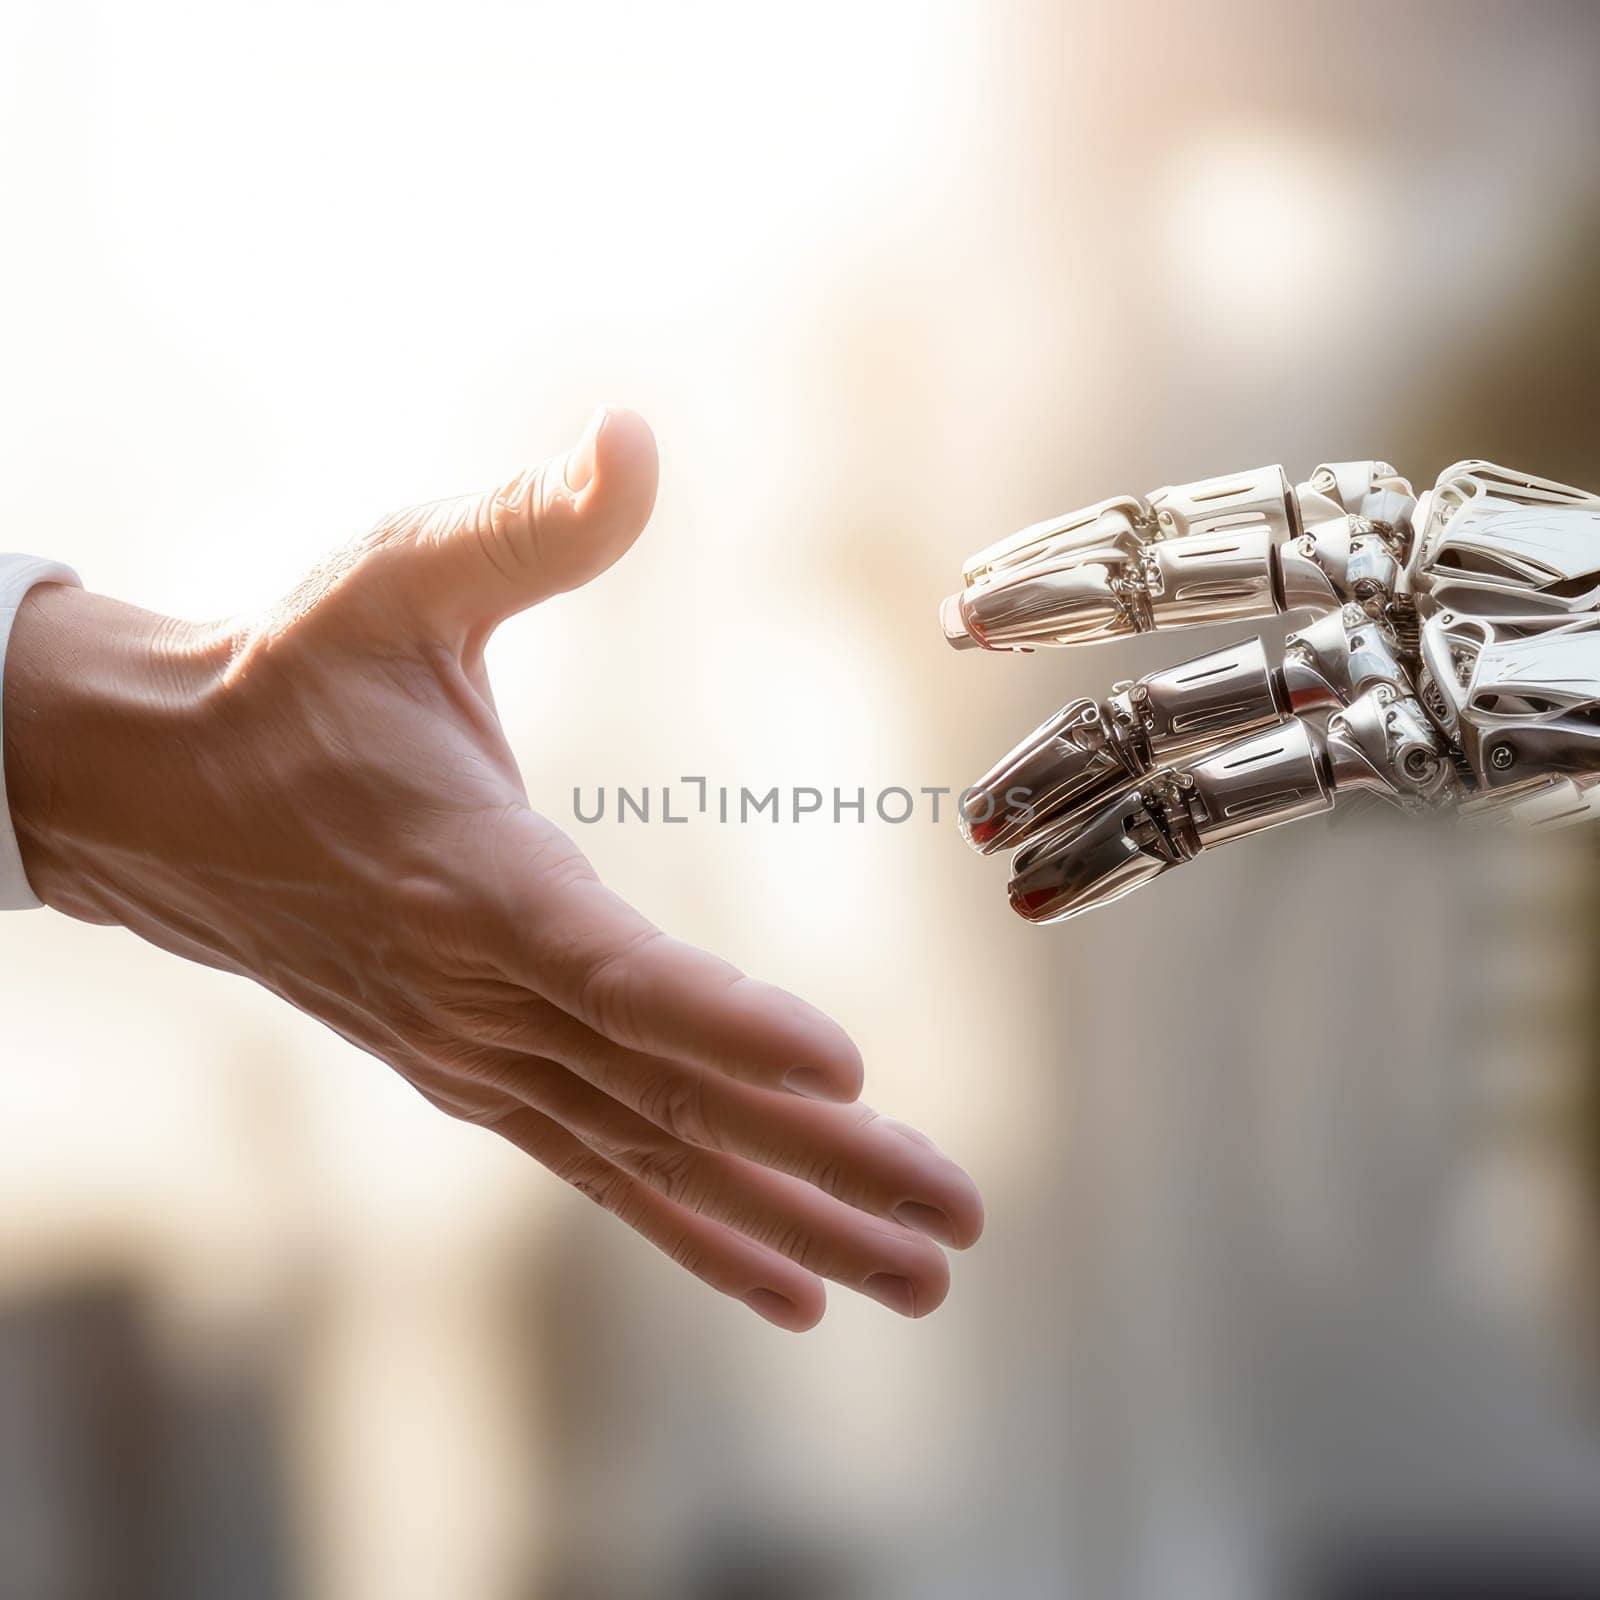 Touch of a human hand and a cyborg robot hand with artificial intelligence, future technologies. Internet and digital technologies. Global network. Integrating technology and human interaction. Digital technologies